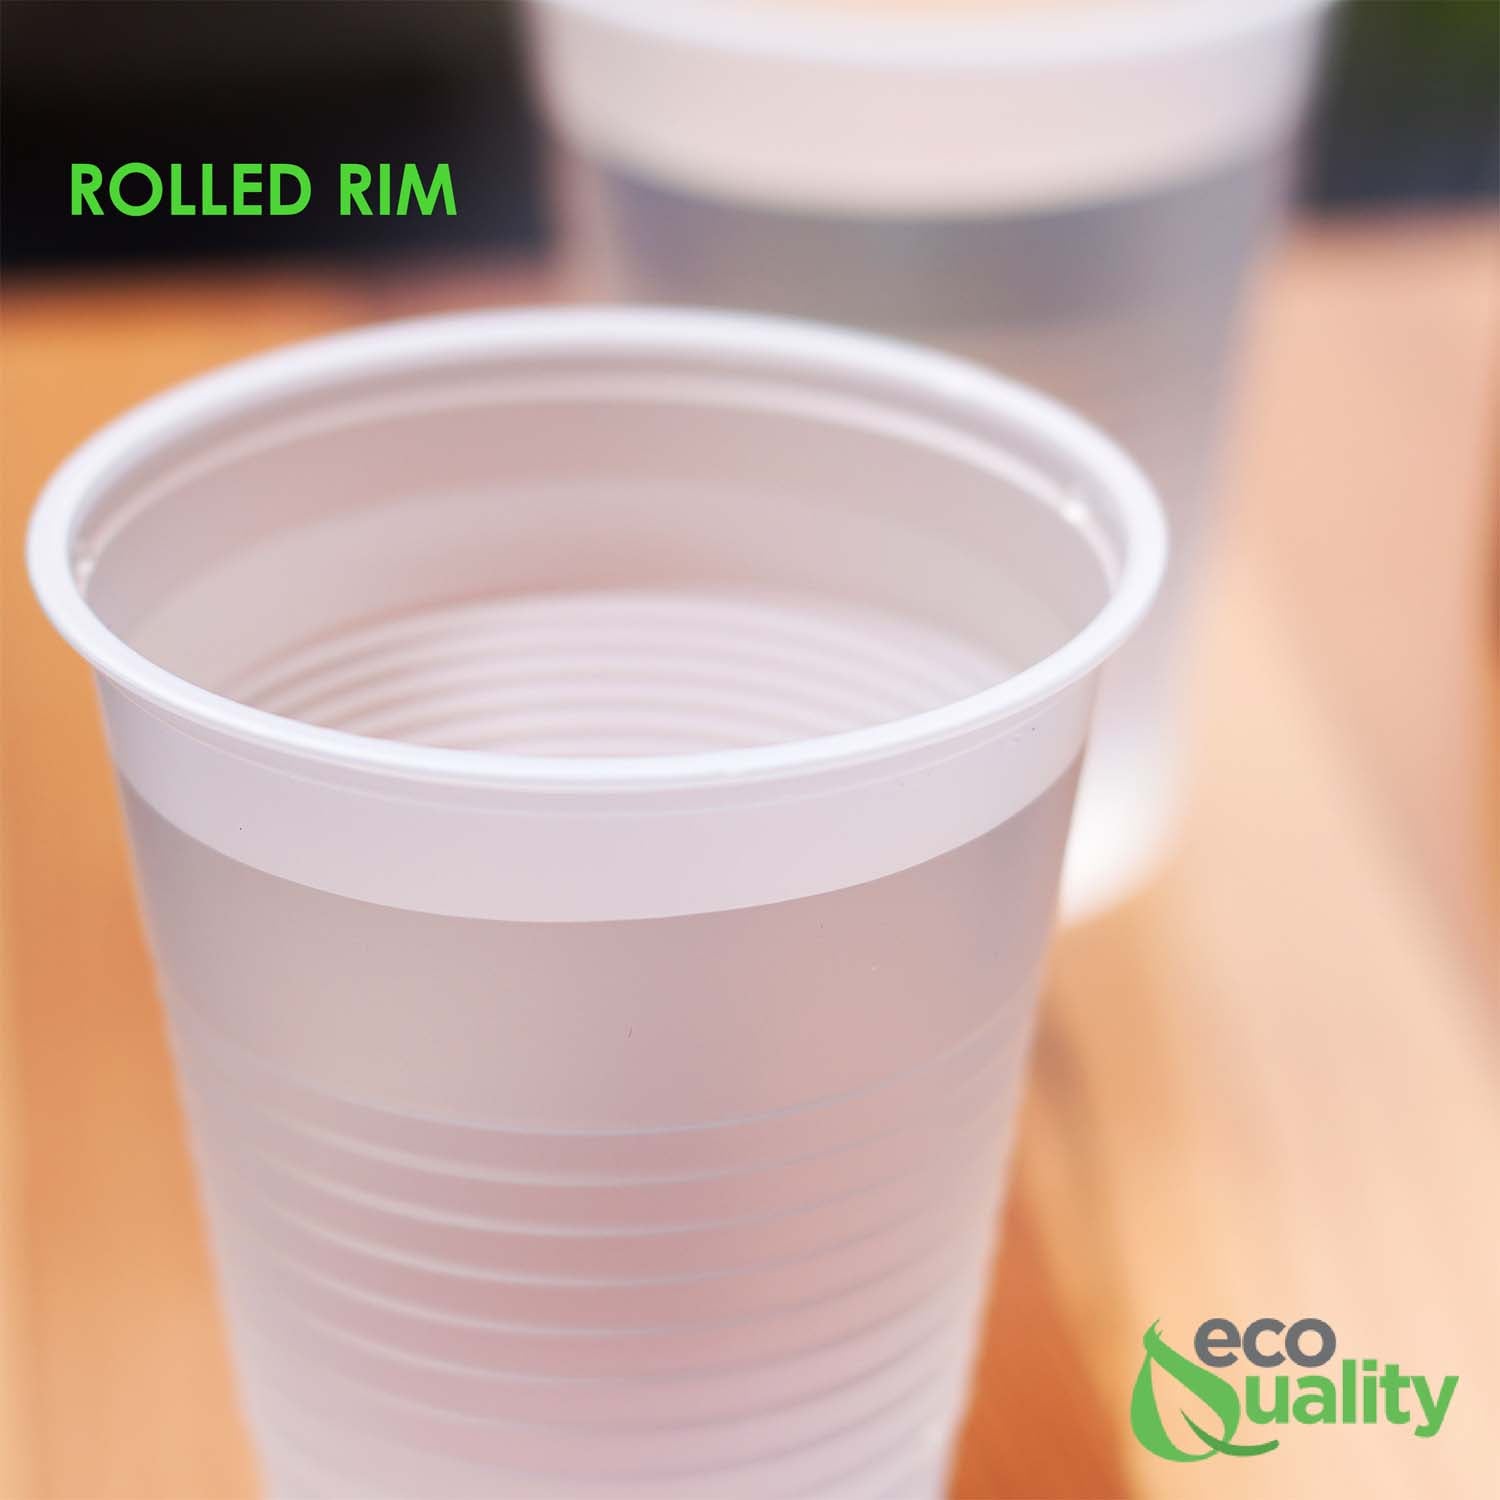 100] Translucent Plastic Cups - Disposable 7 ounce Cold Drink